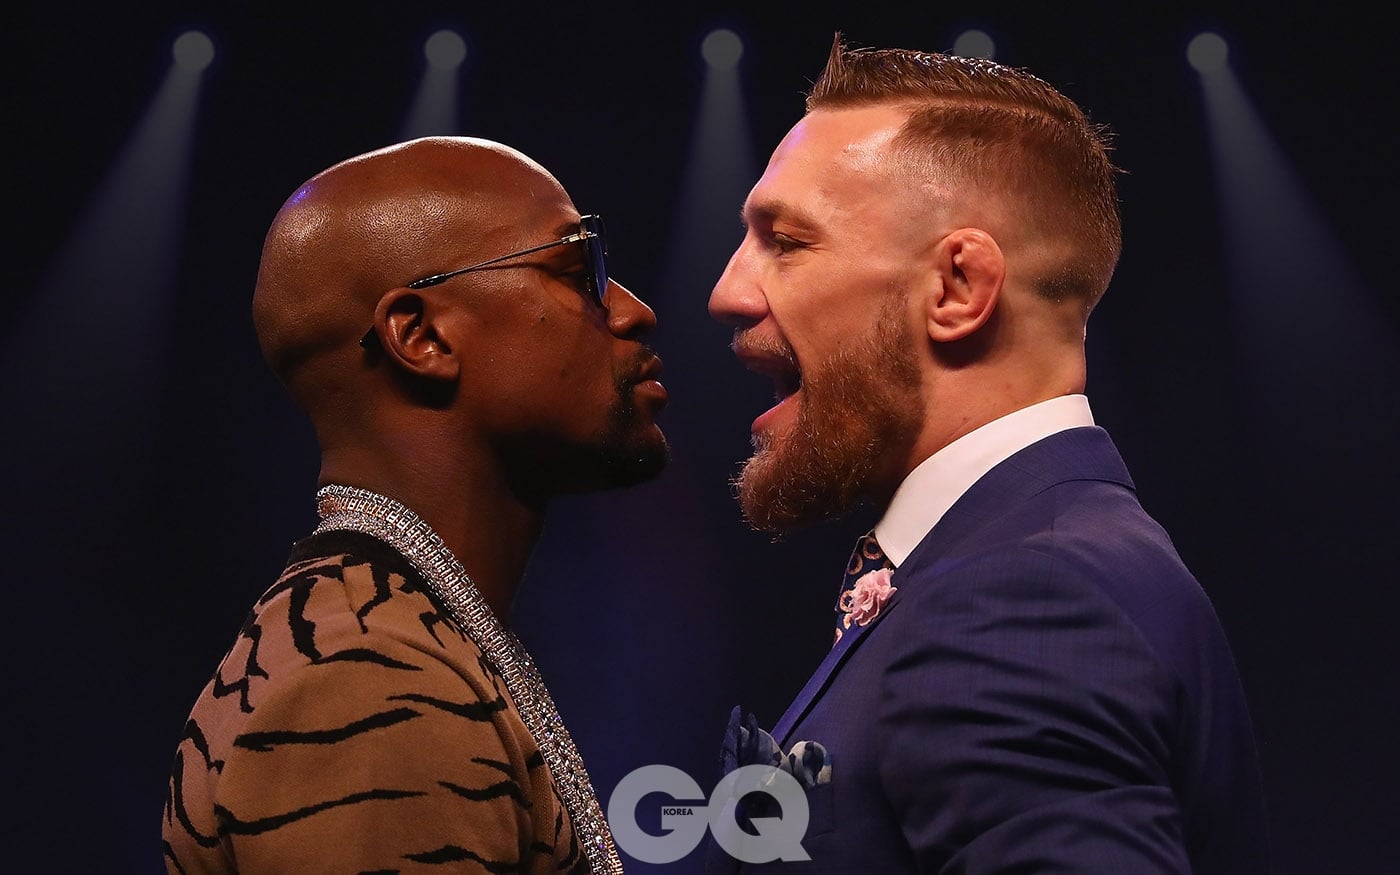 LONDON, ENGLAND - JULY 14:  Floyd Mayweather Jr. and Conor McGregor come face to face during the Floyd Mayweather Jr. v Conor McGregor World Press Tour at SSE Arena on July 14, 2017 in London, England.  (Photo by Matthew Lewis/Getty Images)